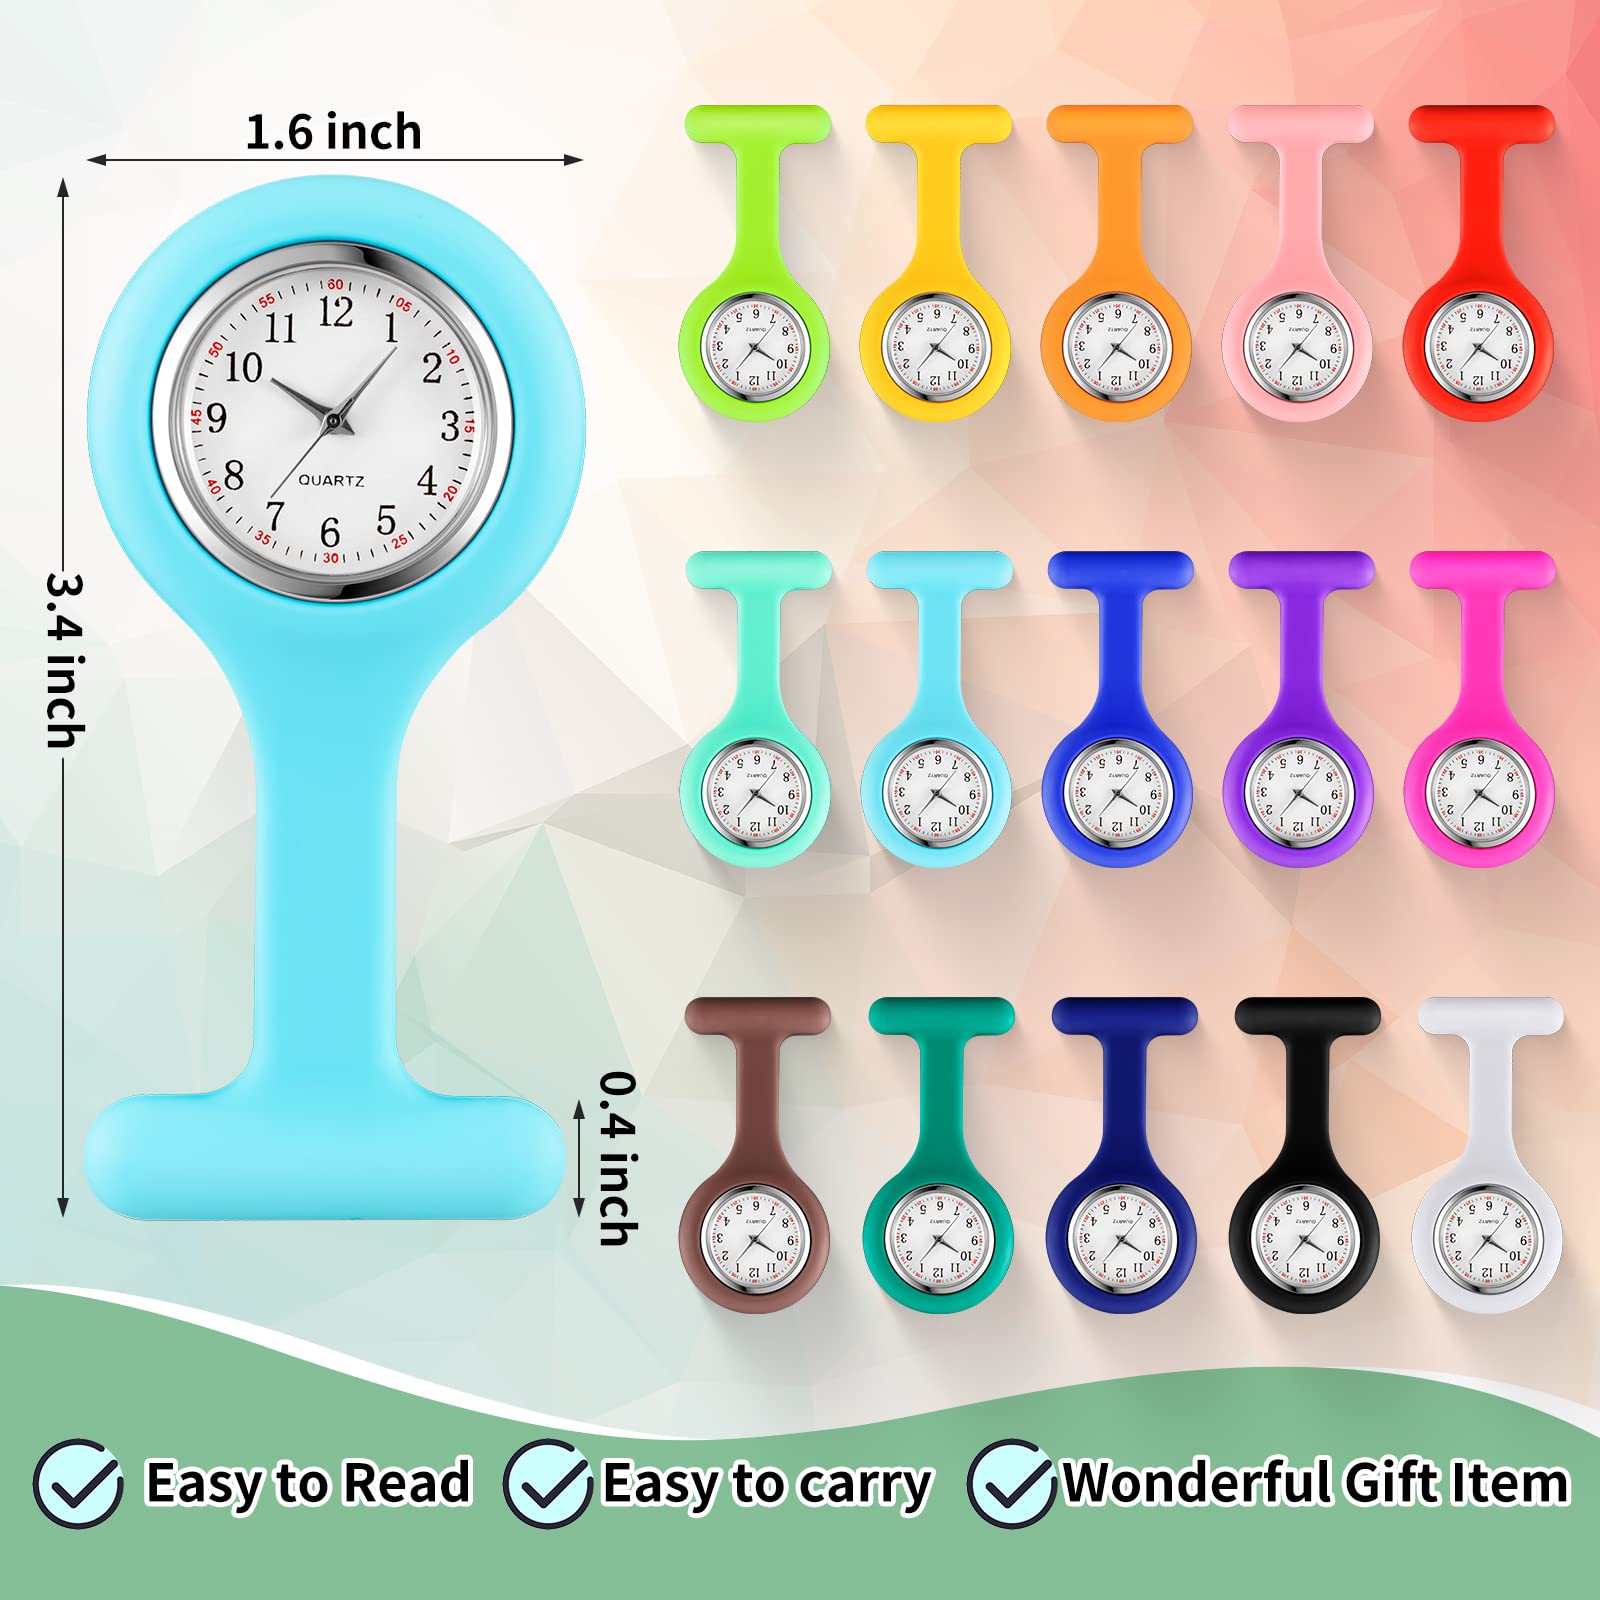 Kenning 15 Pcs Silicone Nurses Watch Lapel Clip on Watches Stethoscope Nurse Pocket for Men Nursing Fob with Second Hand Doctor Gifts Office Travelling Hiking, Colors